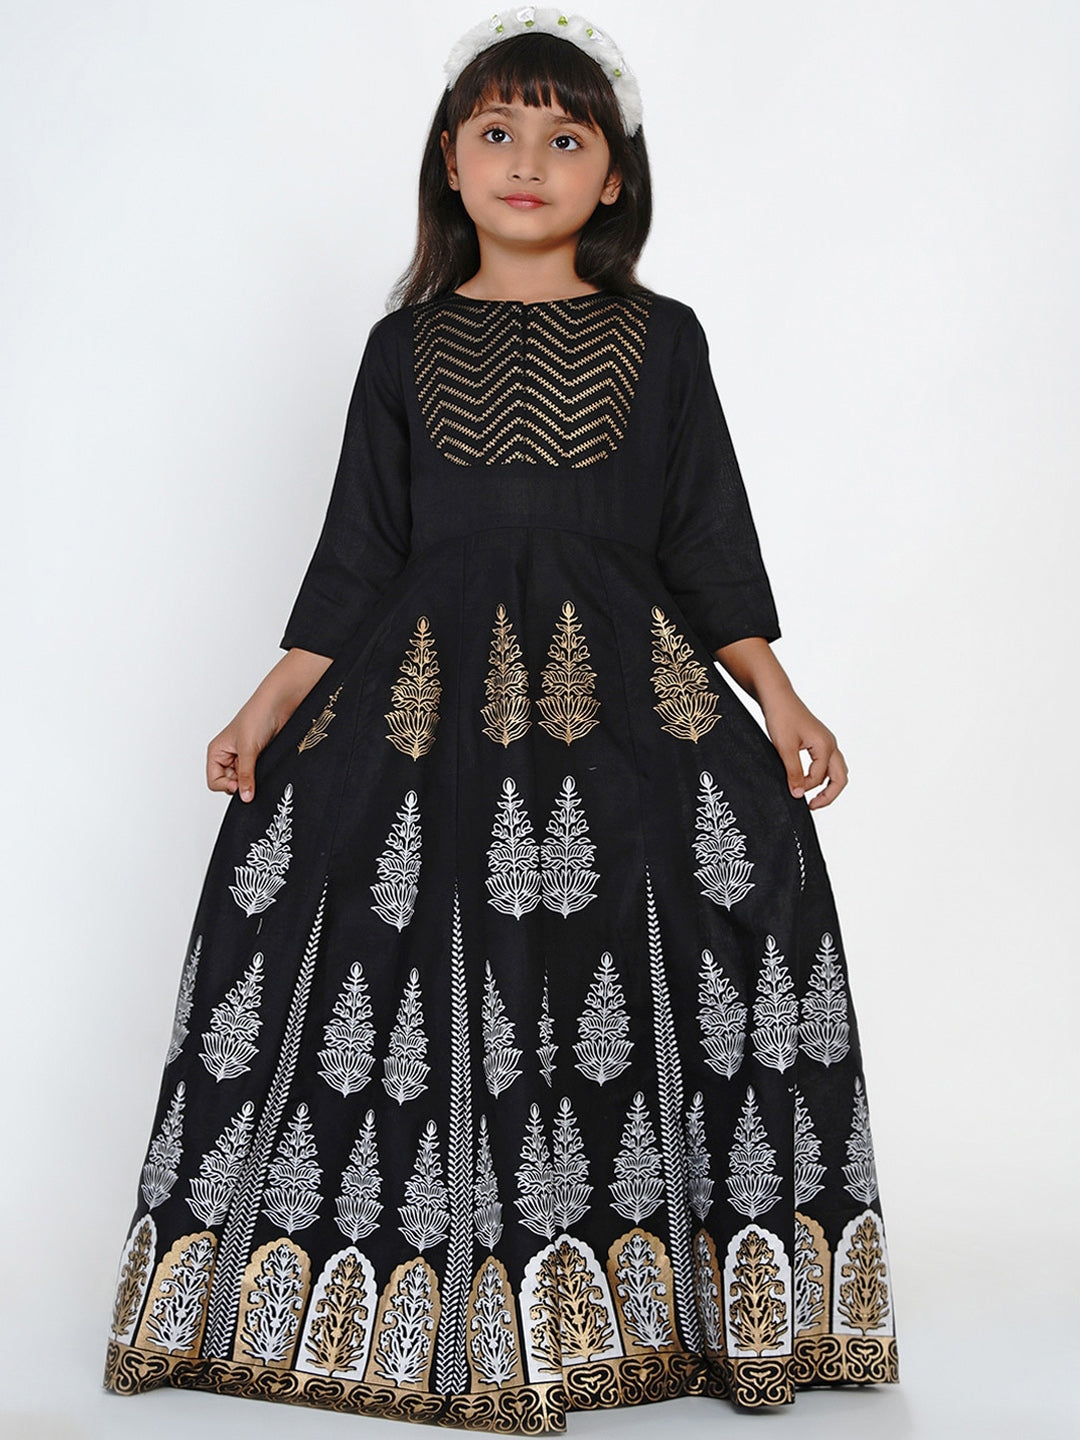 Girl's Black Printed Fit and Flare Dress - NOZ2TOZ KIDS